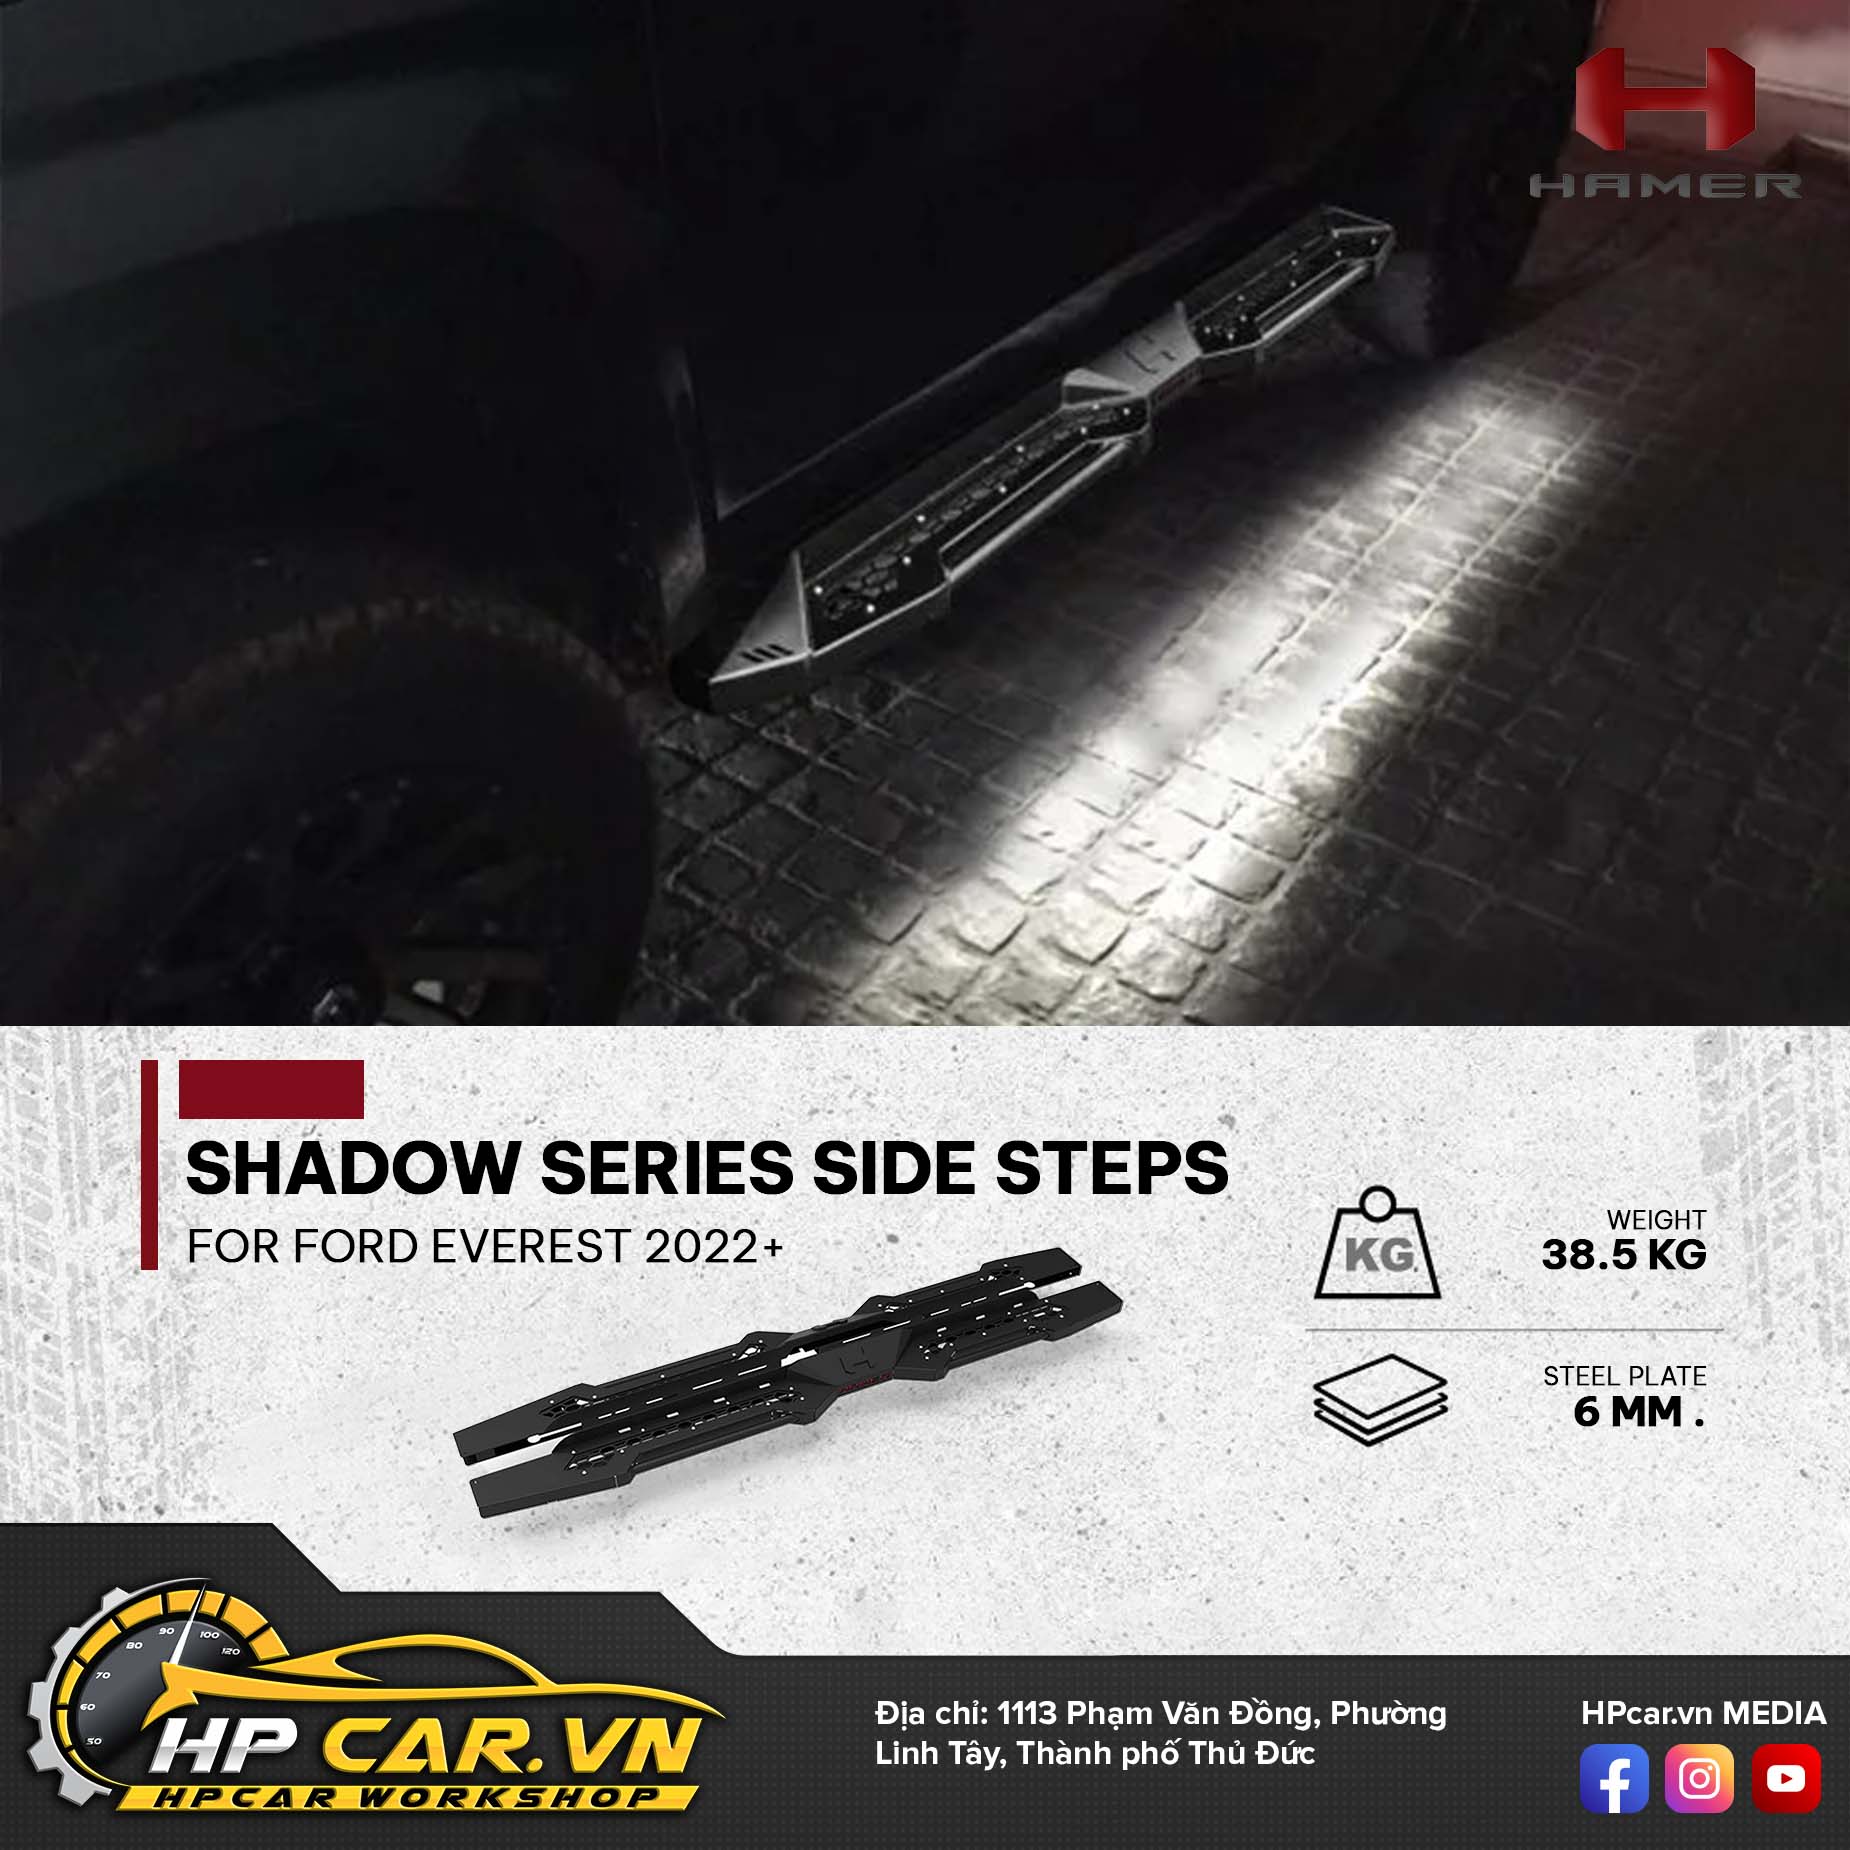 SHADOW SERIES SIDE STEPS FOR FORD EVEREST 2022+